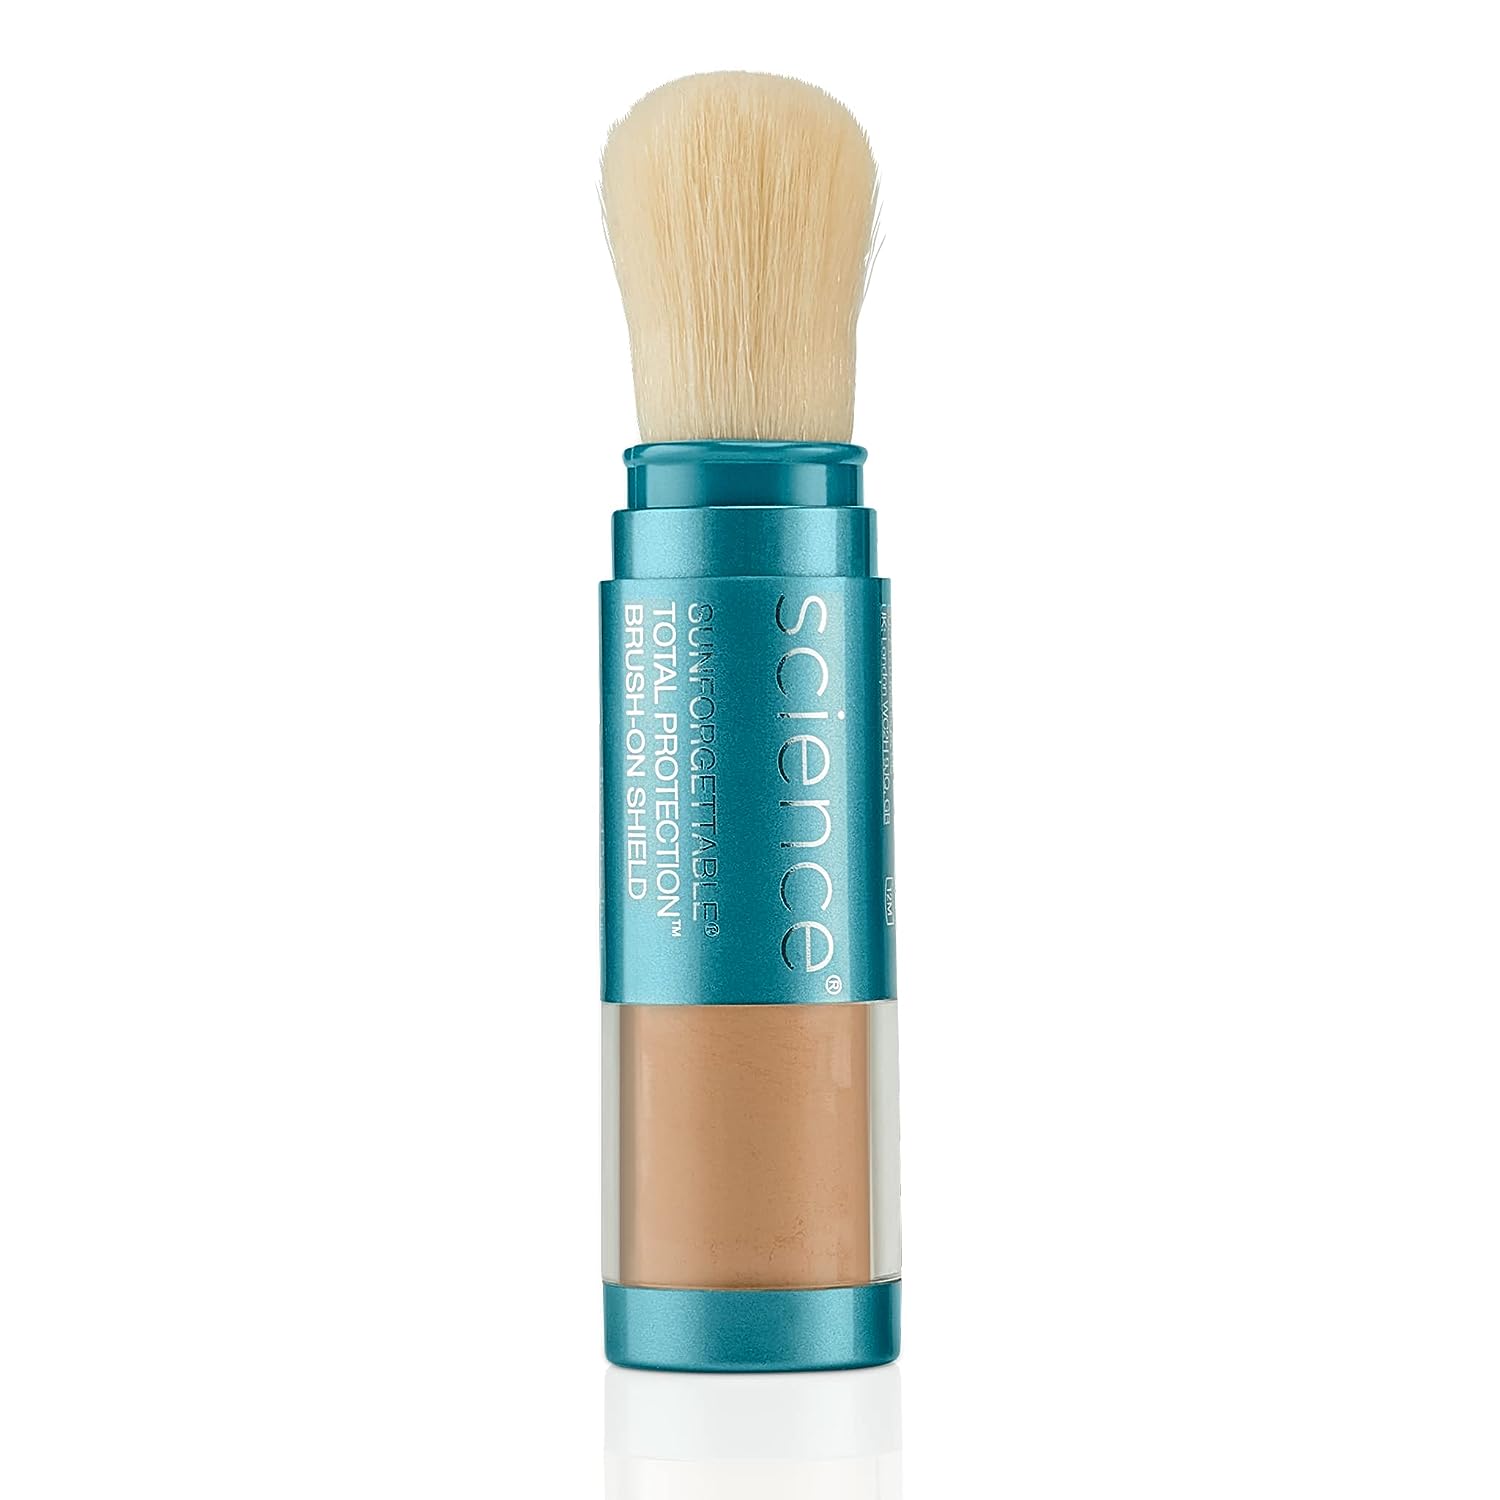 Colorescience Sunforgettable® Total Protection™ Brush-On Shield SPF 50 in Tan